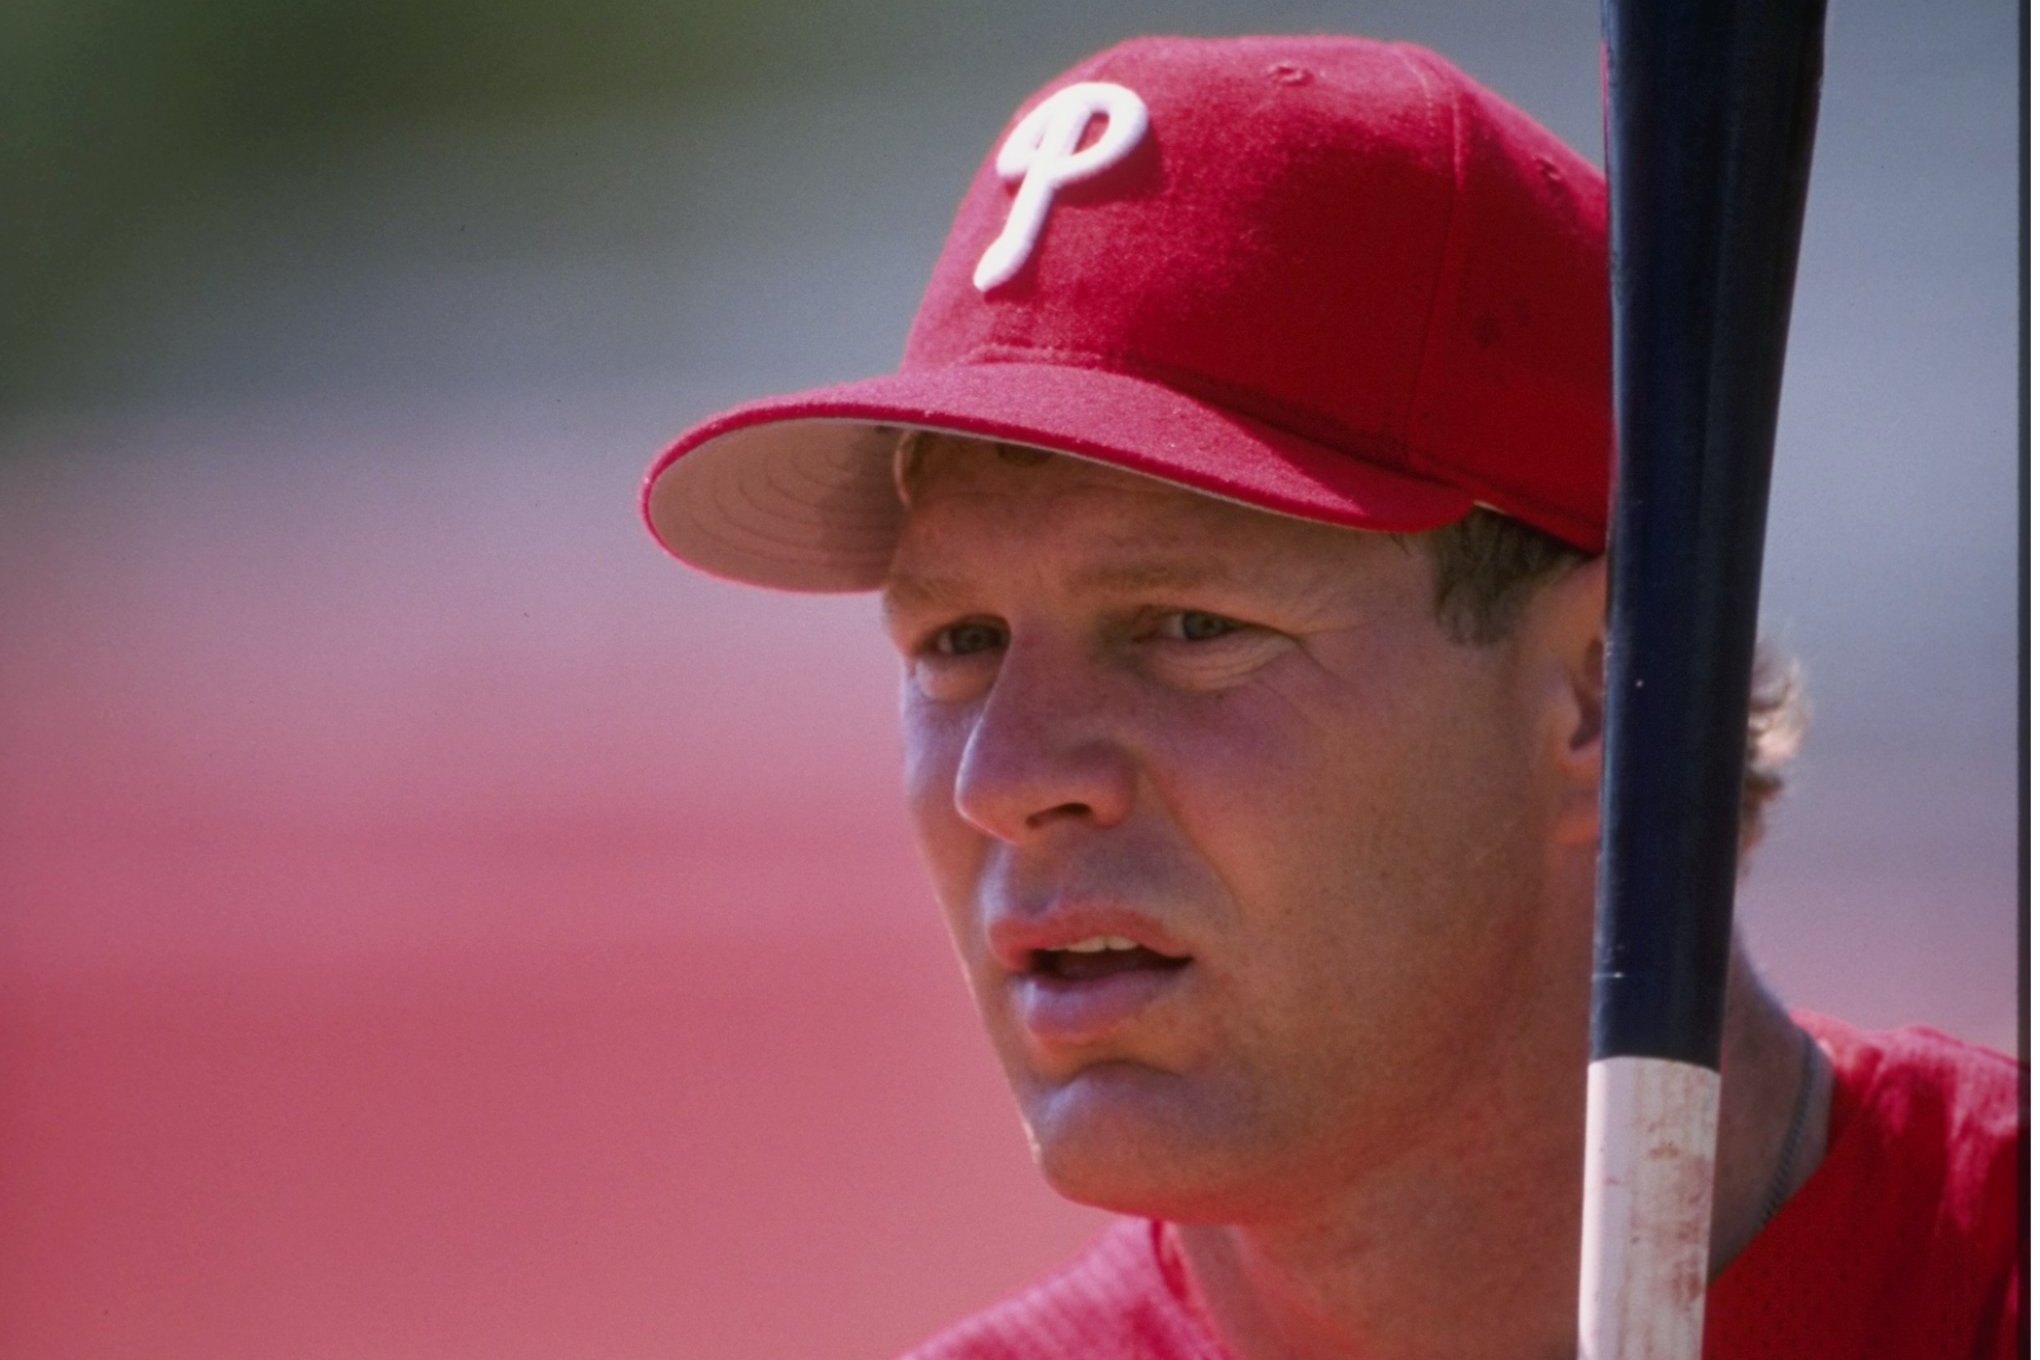 Not in Hall of Fame - 27. Lenny Dykstra